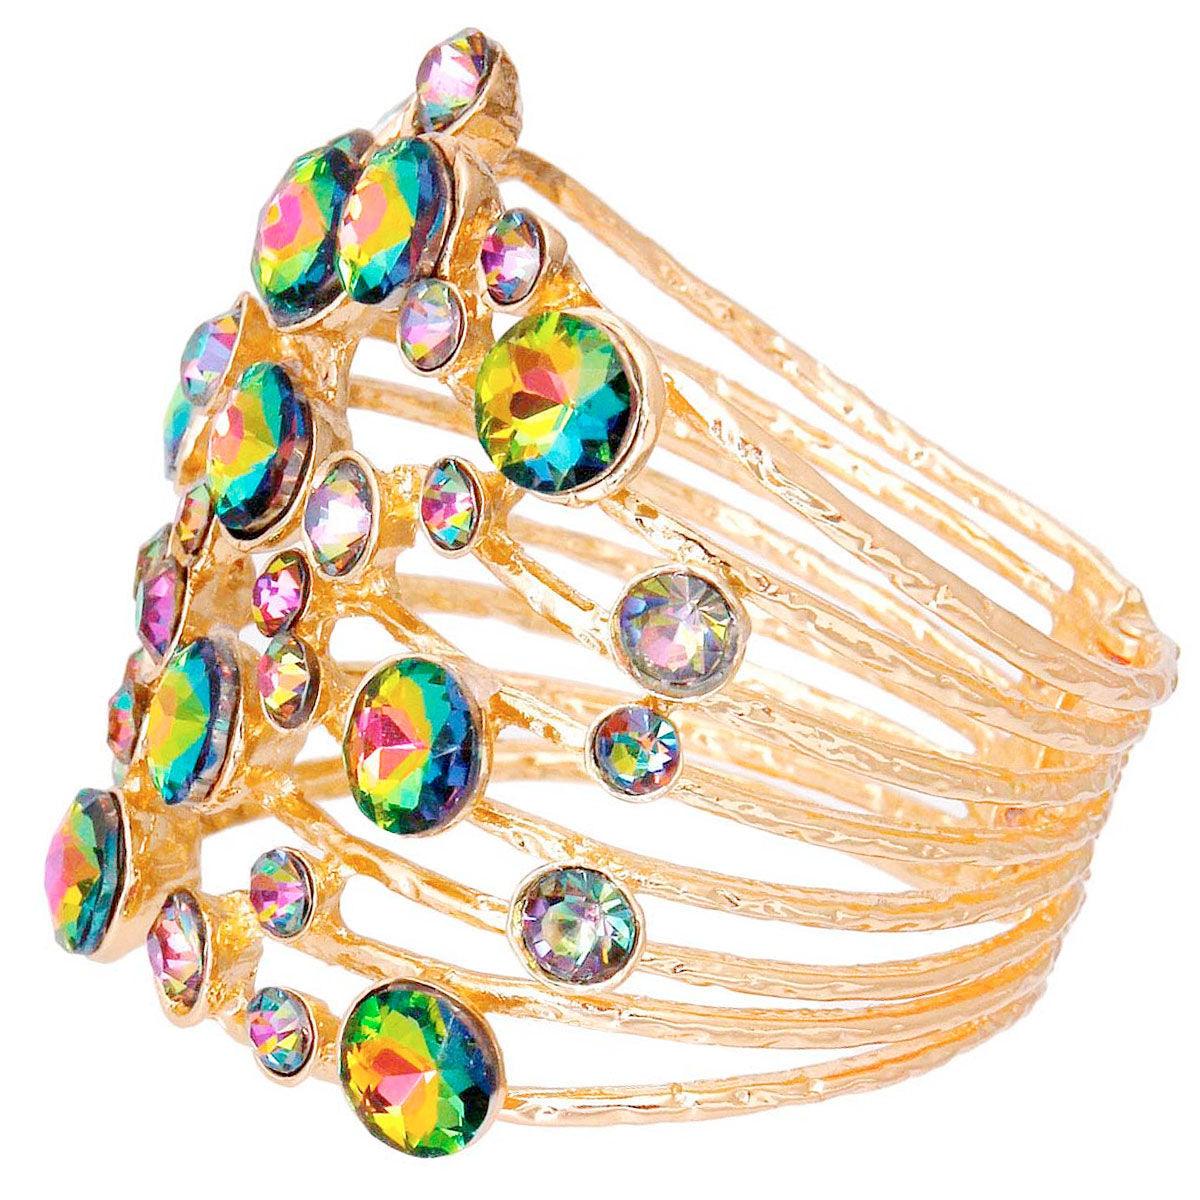 Glam Up Your Wrist: Textured Bracelet with Colorful Rhinestones